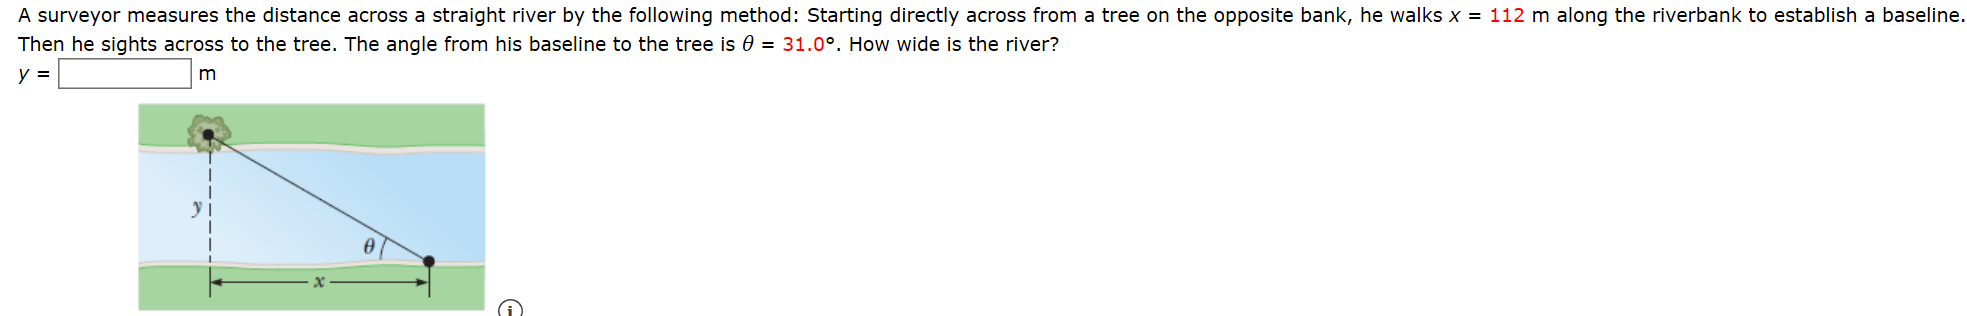 A surveyor measures the distance across a straight river by the following method: Starting directly across from a tree on the opposite bank, he walks x = 112 m along the riverbank to establish a baseline.
Then he sights across to the tree. The angle from his baseline to the tree is 0 = 31.0°. How wide is the river?
y =
